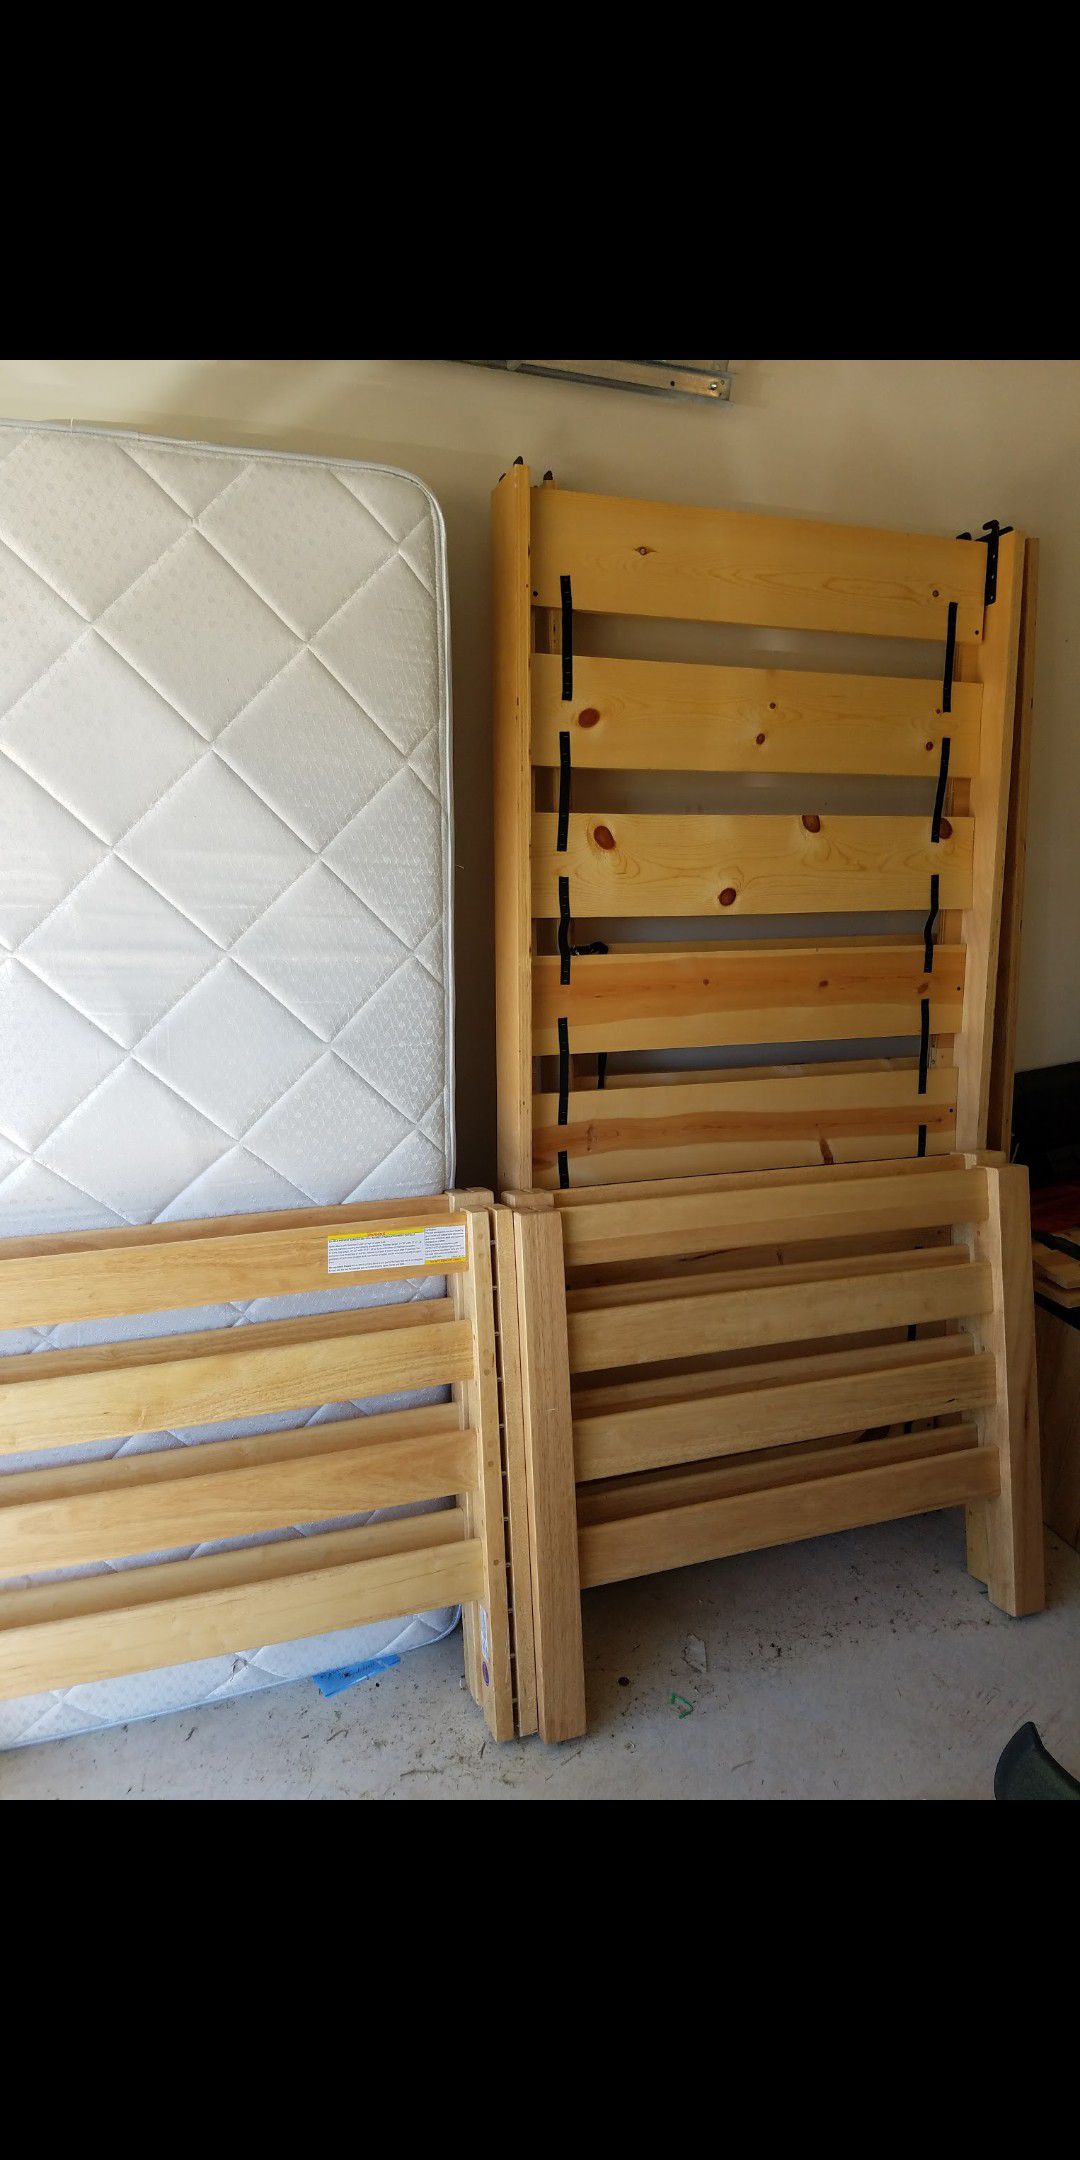 2 twin XL mattresses and bed frames